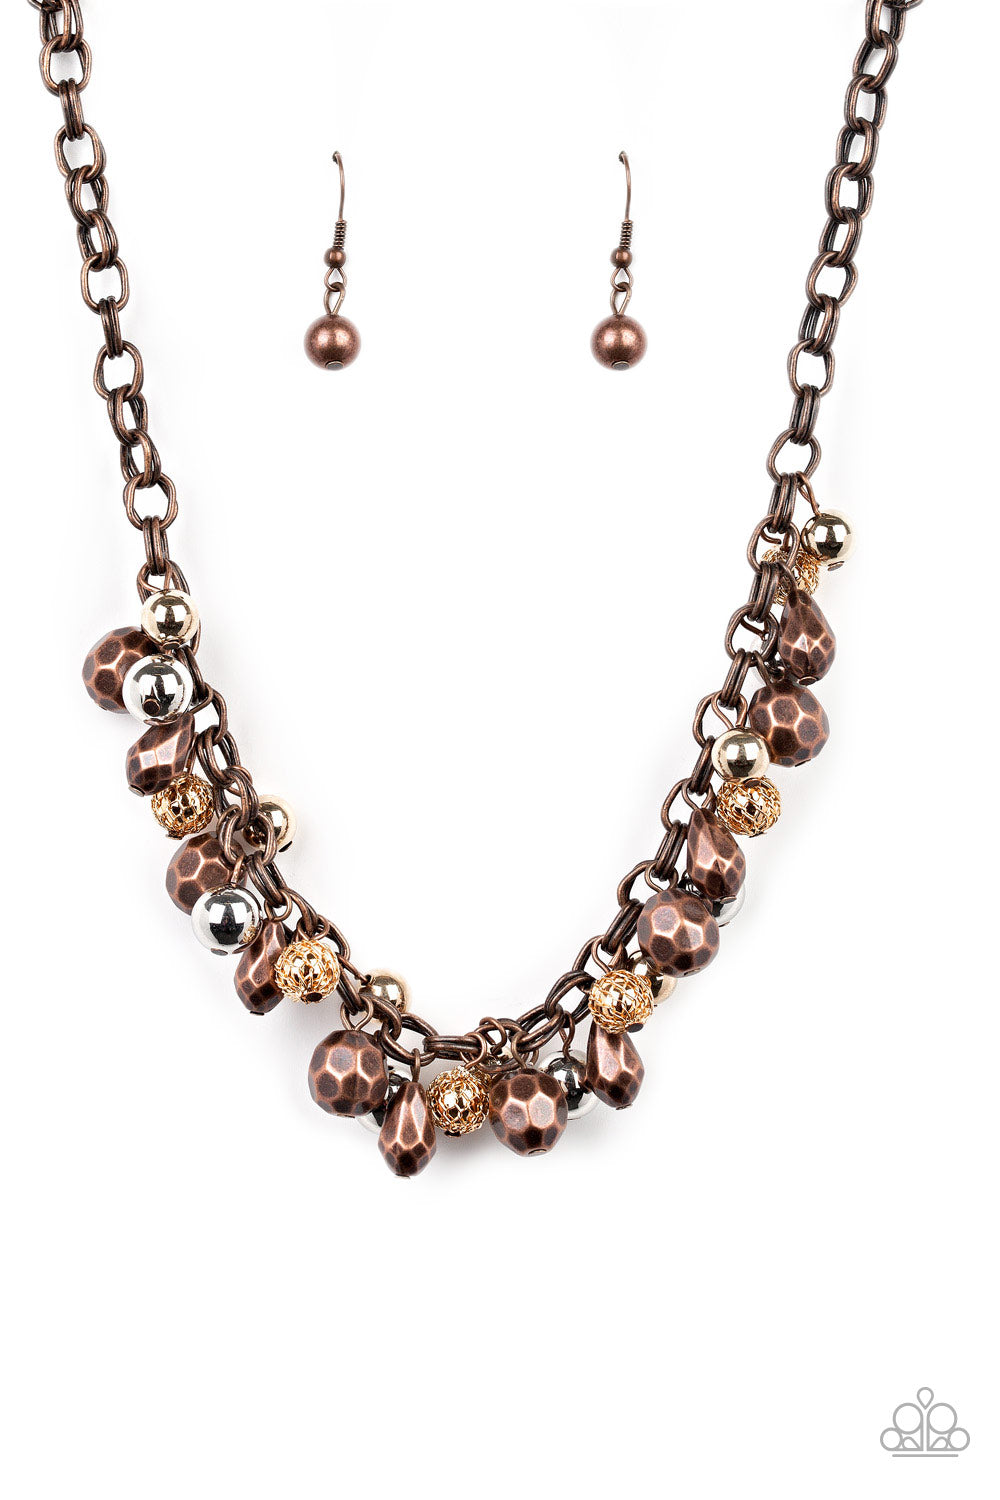 BUILDING MY BRAND - Paparazzi - Featuring shiny, faceted, and mesh finishes, mismatched copper, gold, and silver beads trickle below the collar for an edgy industrial look. Features an adjustable clasp closure.